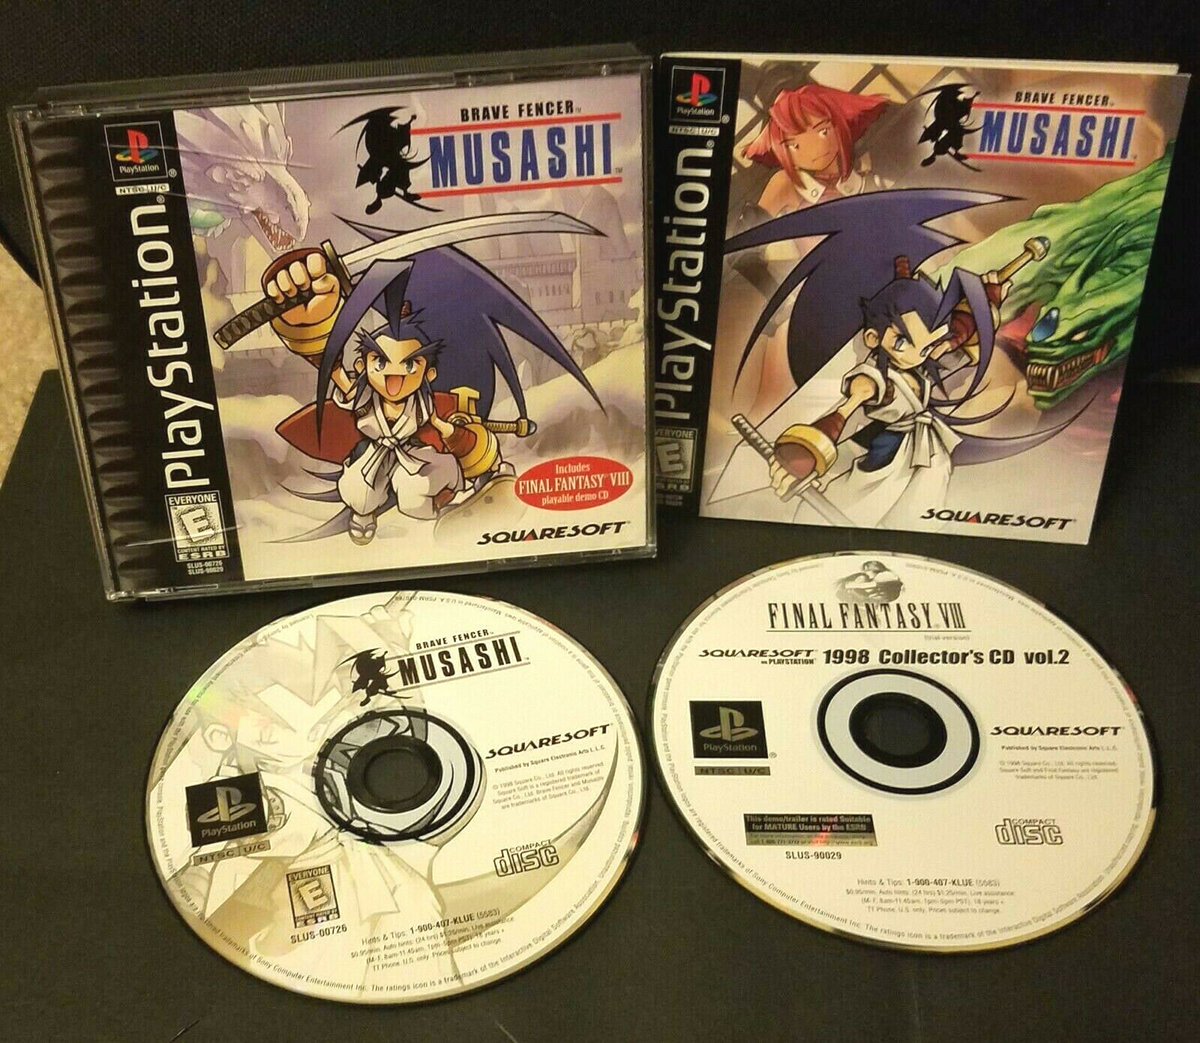 JRPG fans are in for a treat! I have a *COMPLETE* copy of Brave Fencer Musashi and Xenogears in like-new condition--both black label games! Worldwide shipping, too! Check 'em out here:  https://www.ebay.com/sch/m.html?_nkw=&_armrs=1&_ipg=&_from=&_ssn=capnson&_sop=10